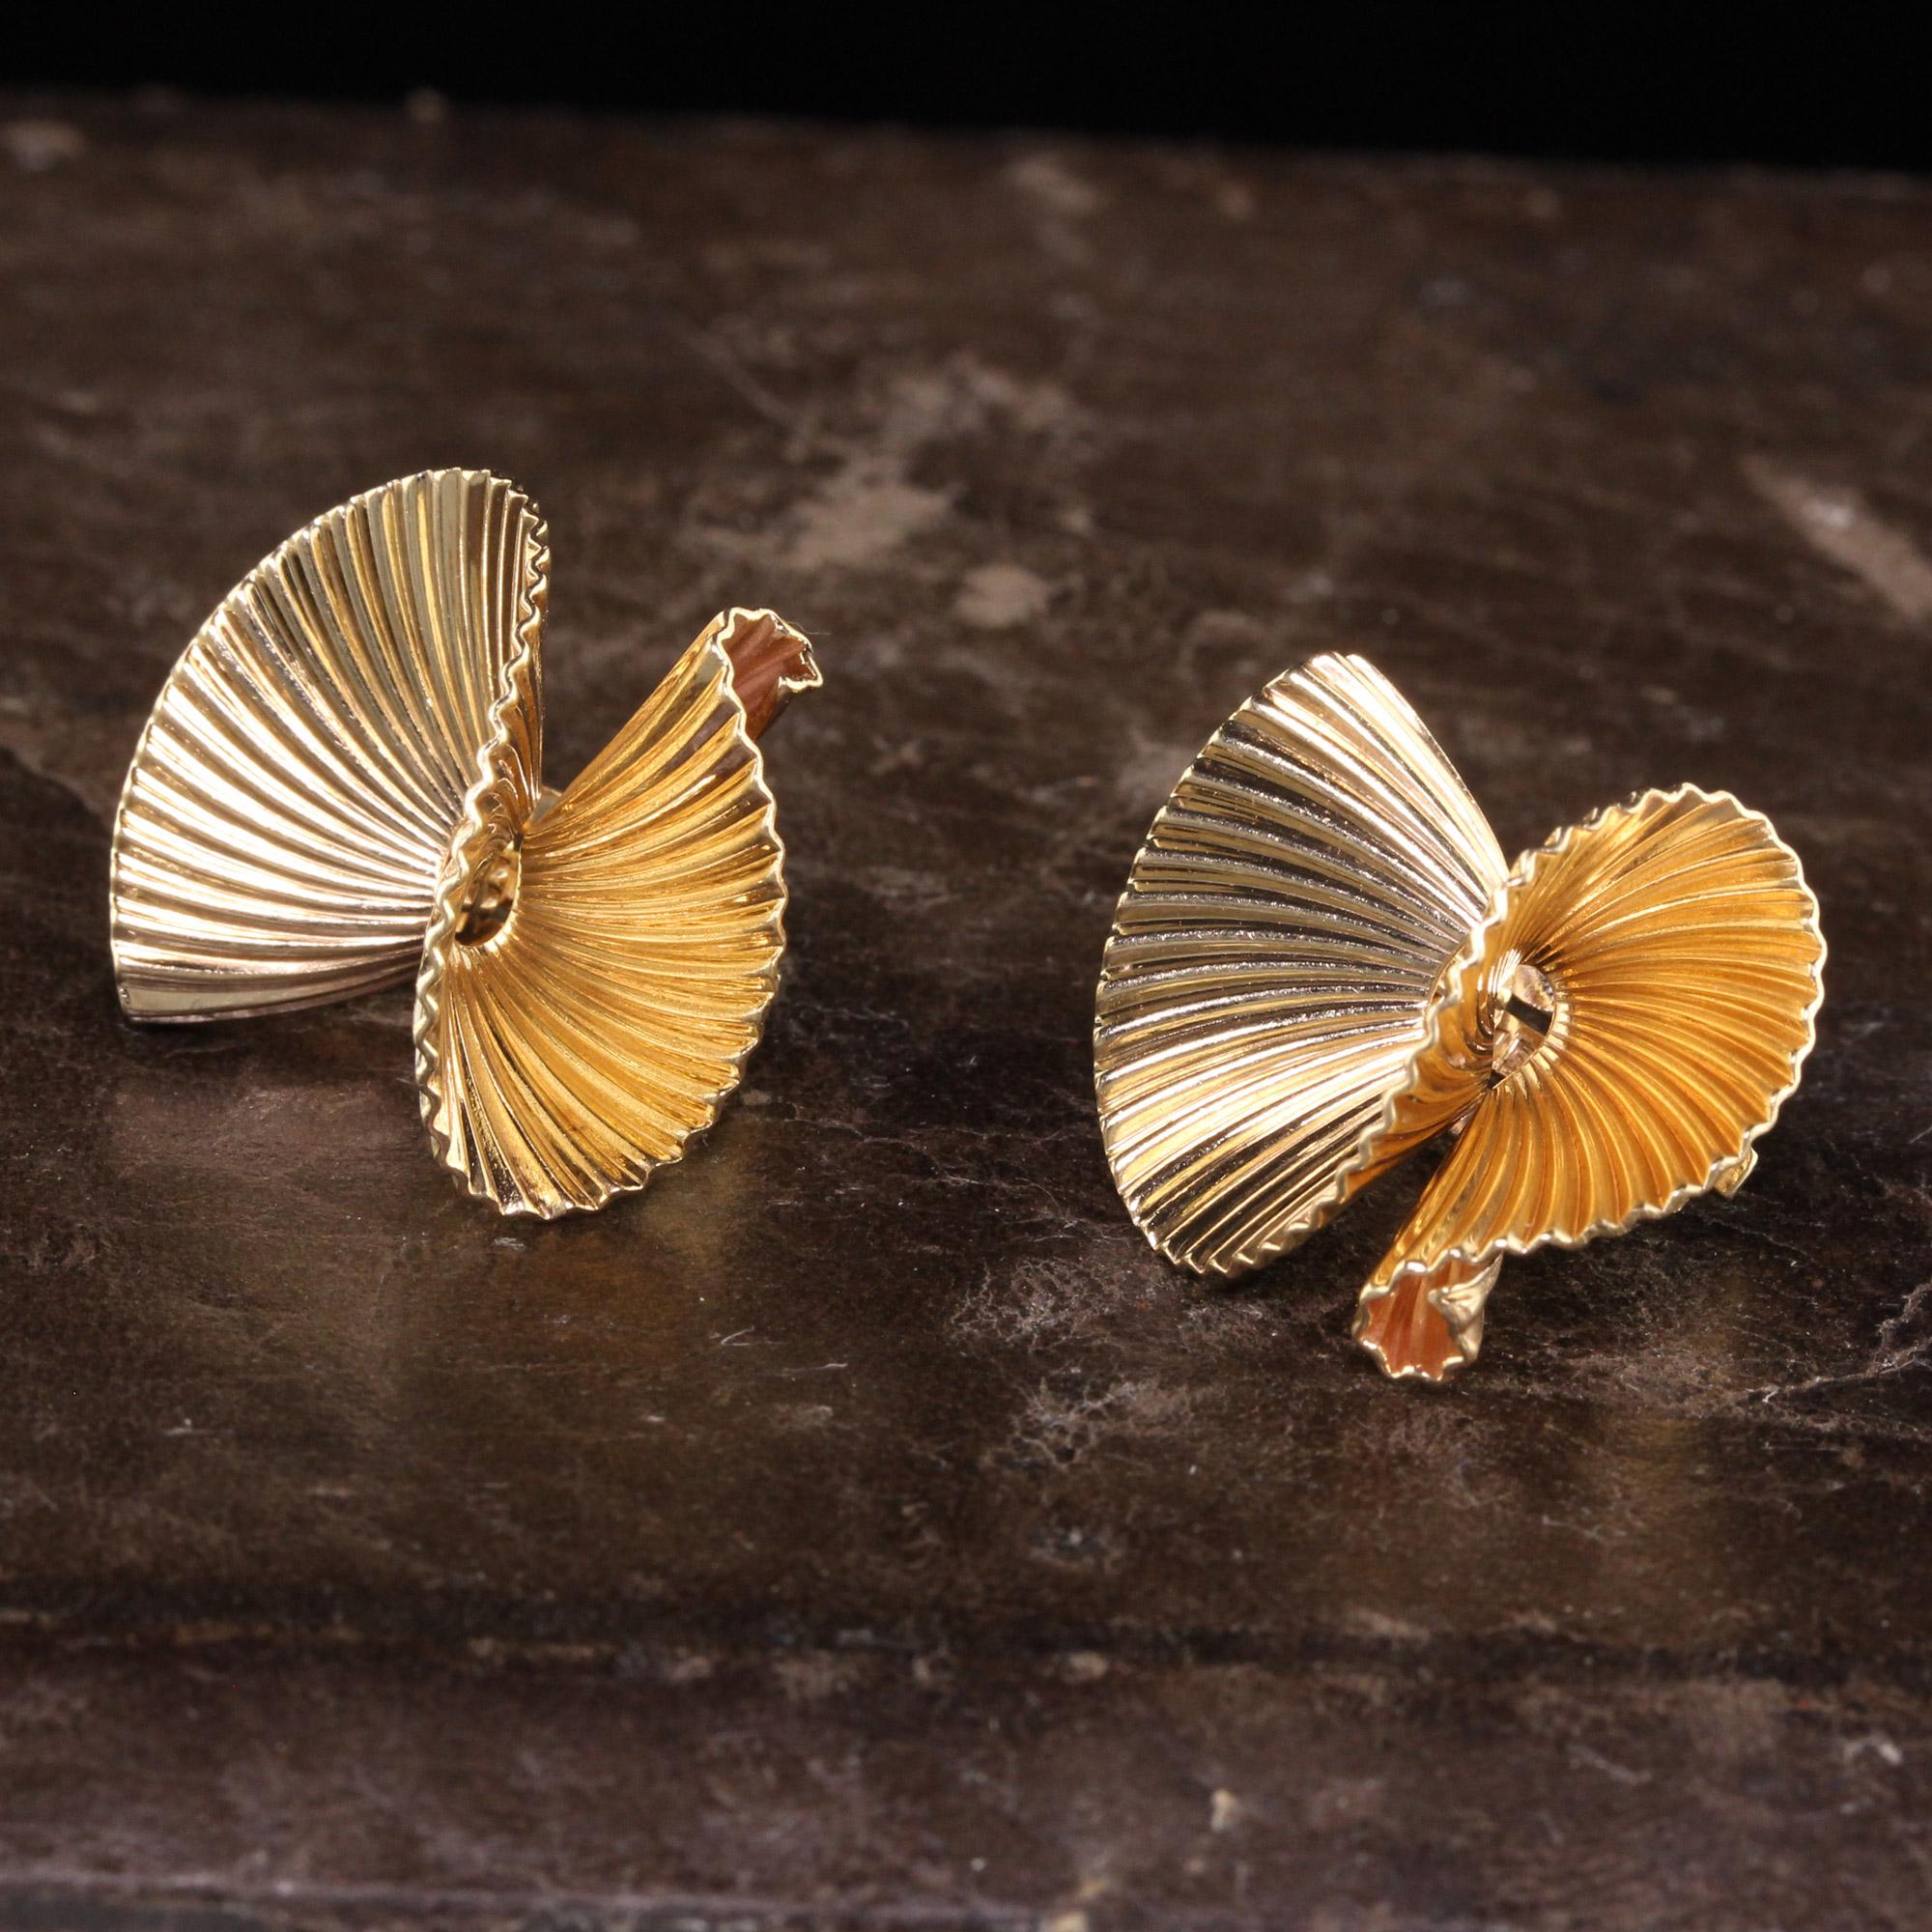 Beautiful Retro Vintage Tiffany & Co 14K Yellow Gold Fabric Design Earrings. These beautiful Tiffany and Co Retro earrings are crafted in 14K yellow gold and have a design that looks like it is pleated ribbon or fabric. Very well made!

Item